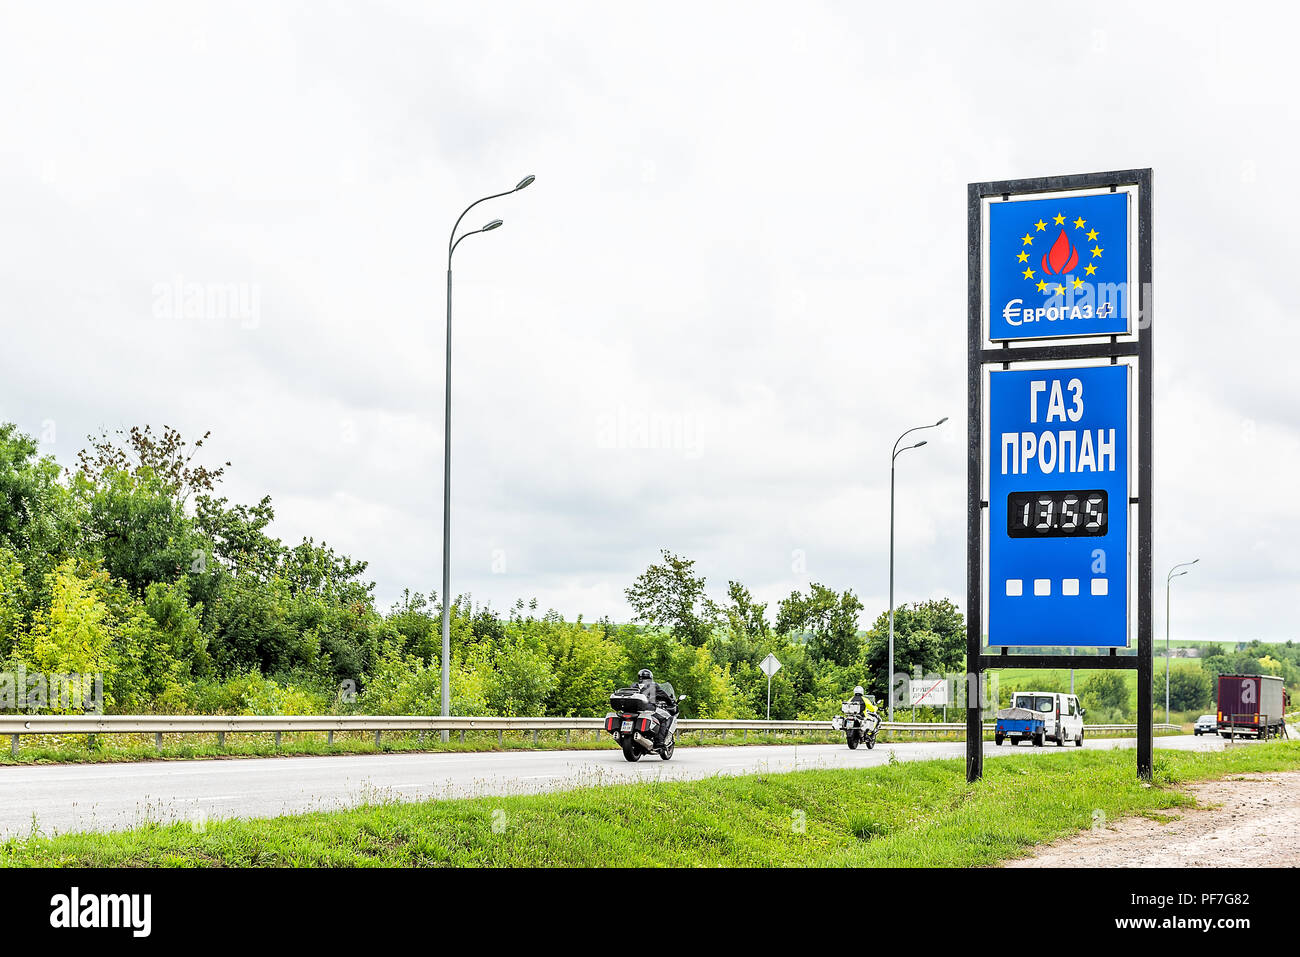 Rivne, Ukraine - July 23, 2018: Evrogas, Eurogas gas station fueld pump sign by road in Western Ukraine with propane price sign in hryvnia, cars on hi Stock Photo